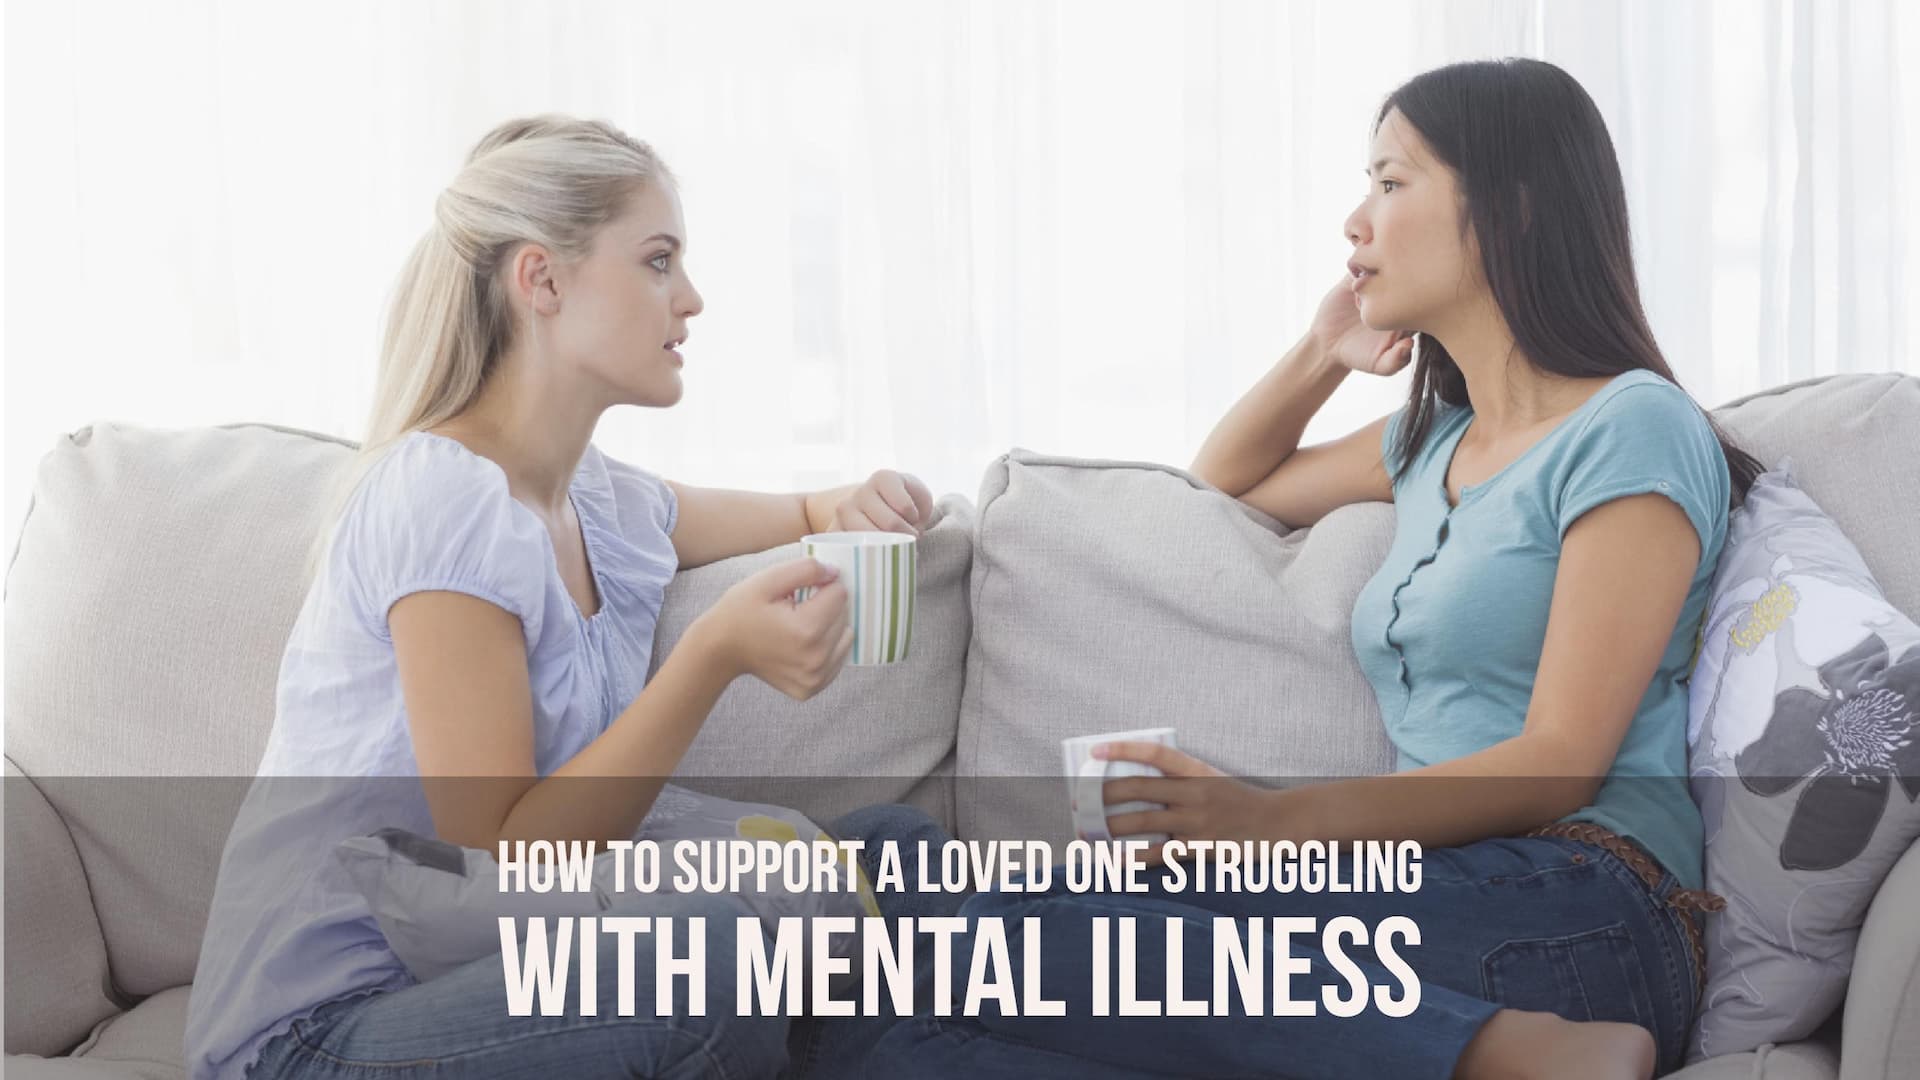 How to support a loved one struggling with mental illness